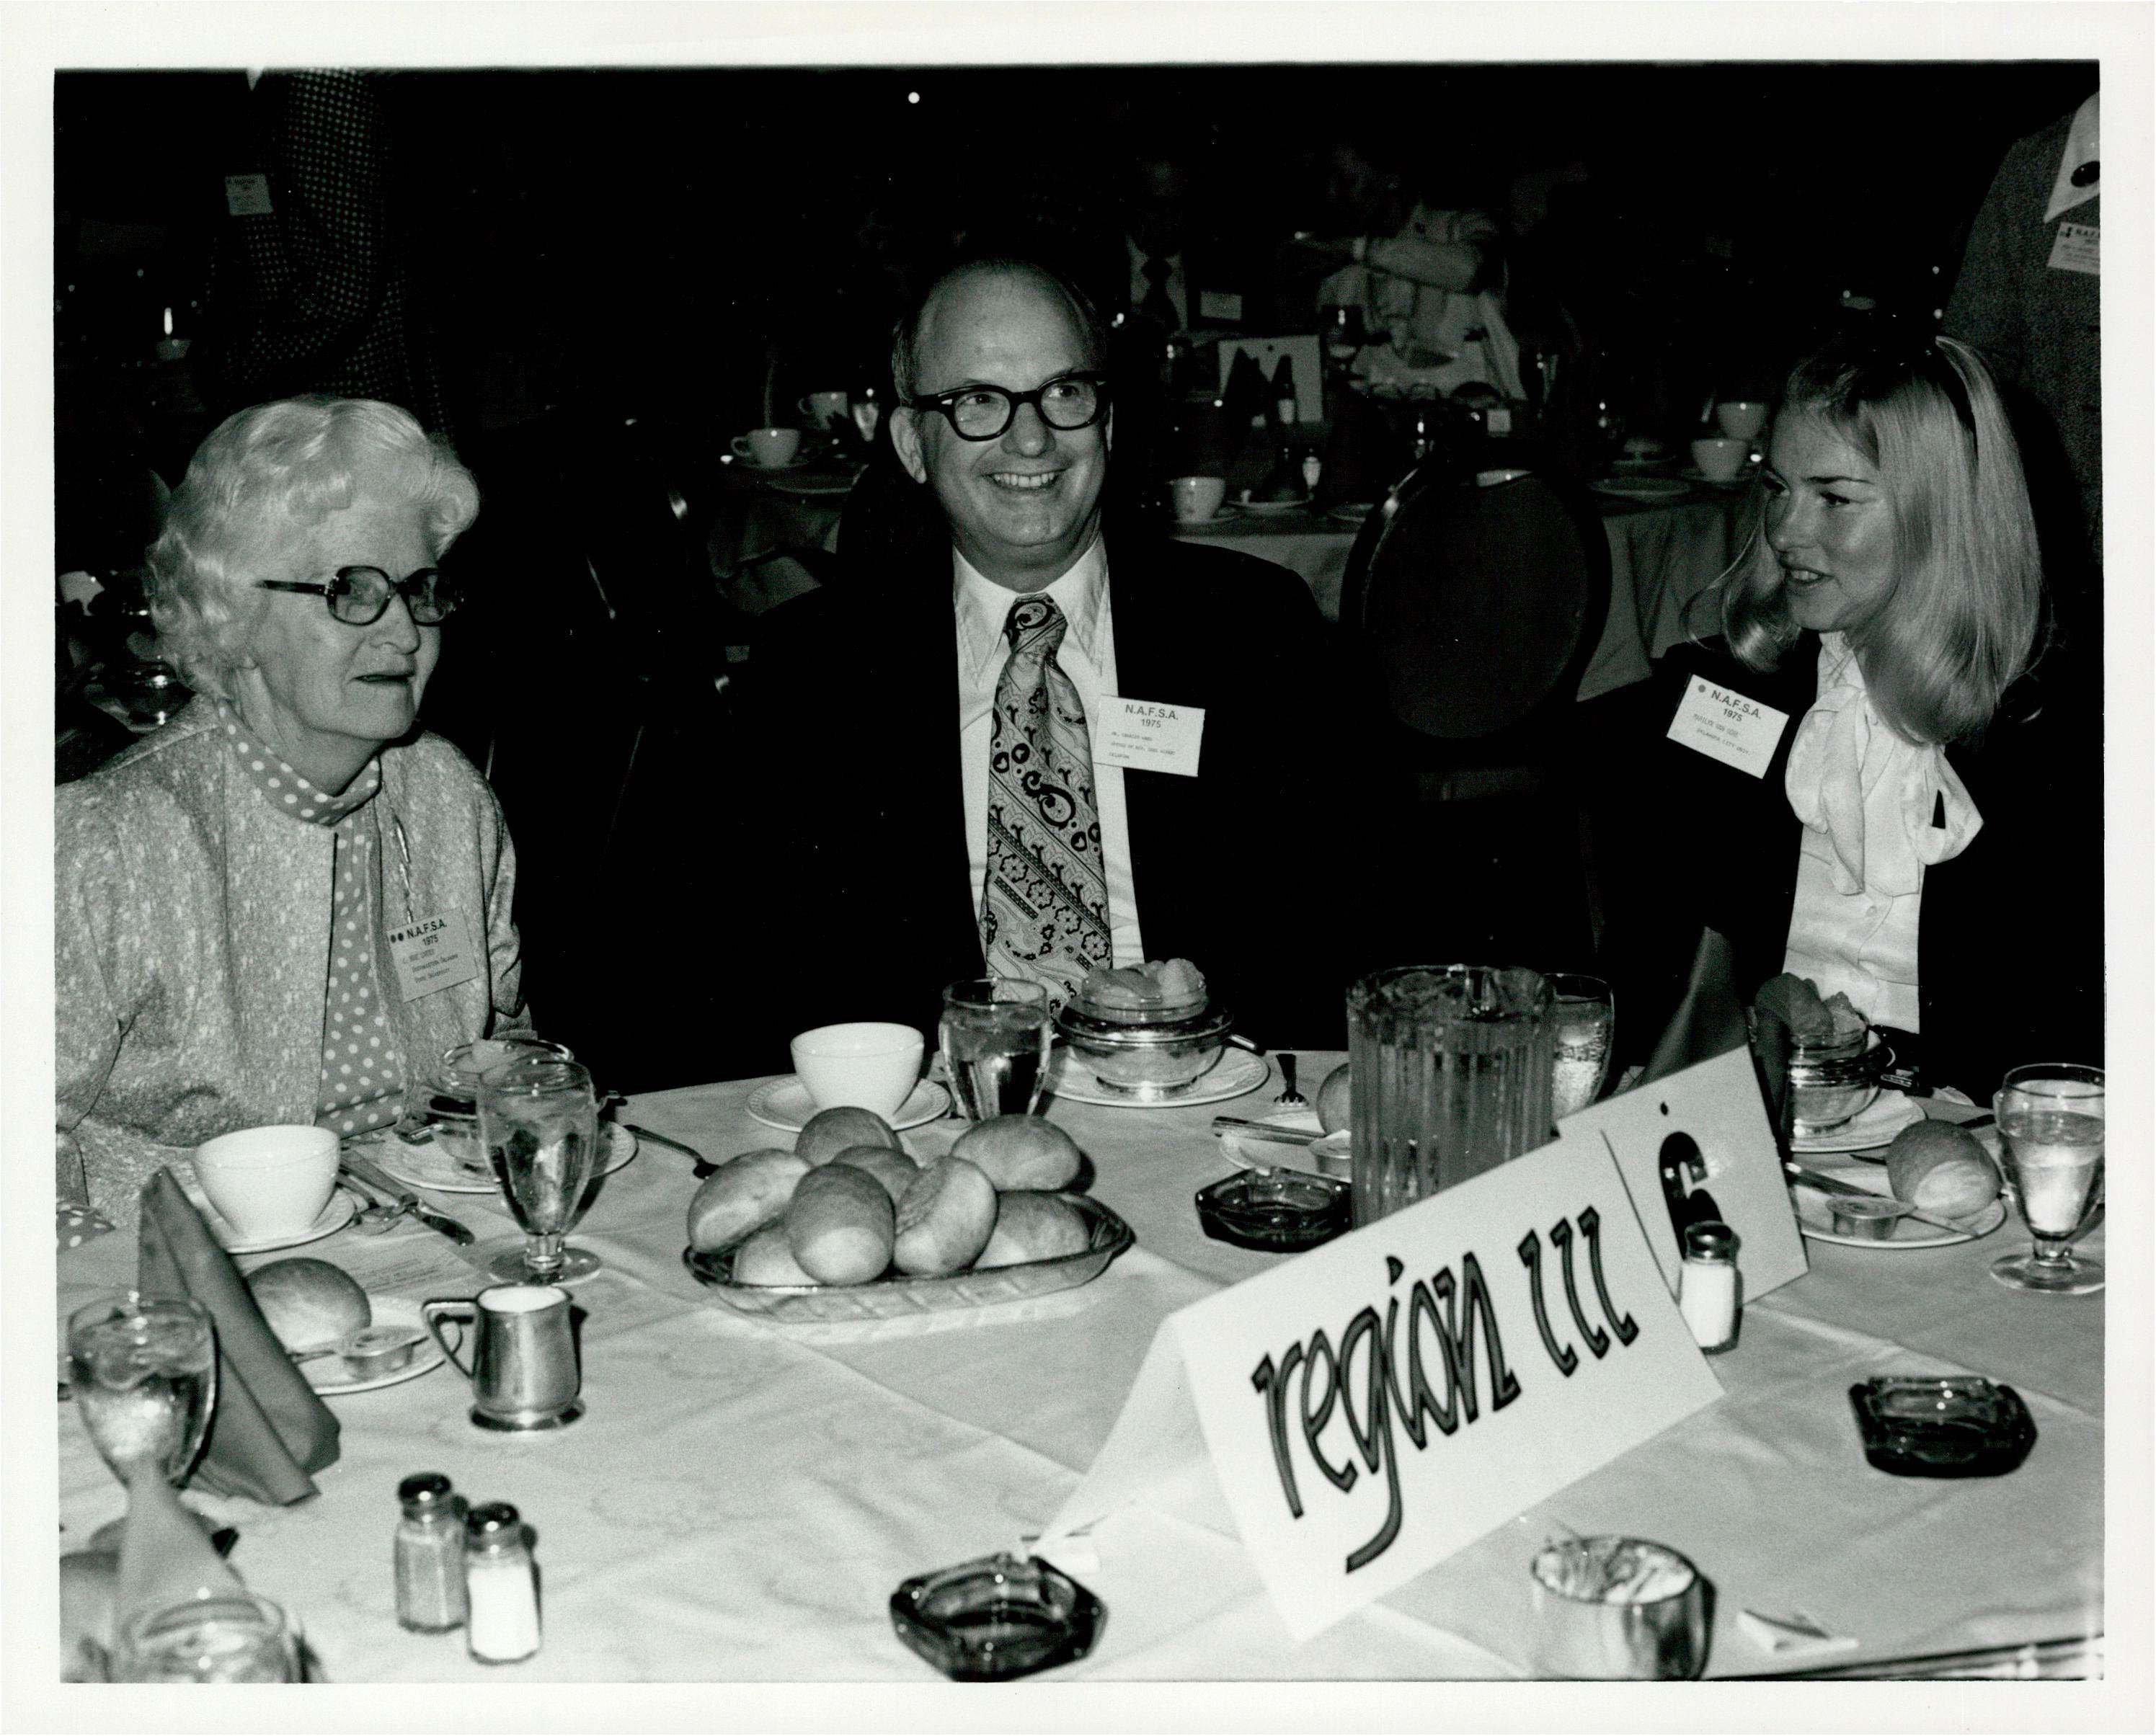 Black and white image of three people at a banquet sitting at a table with a sign that says region III